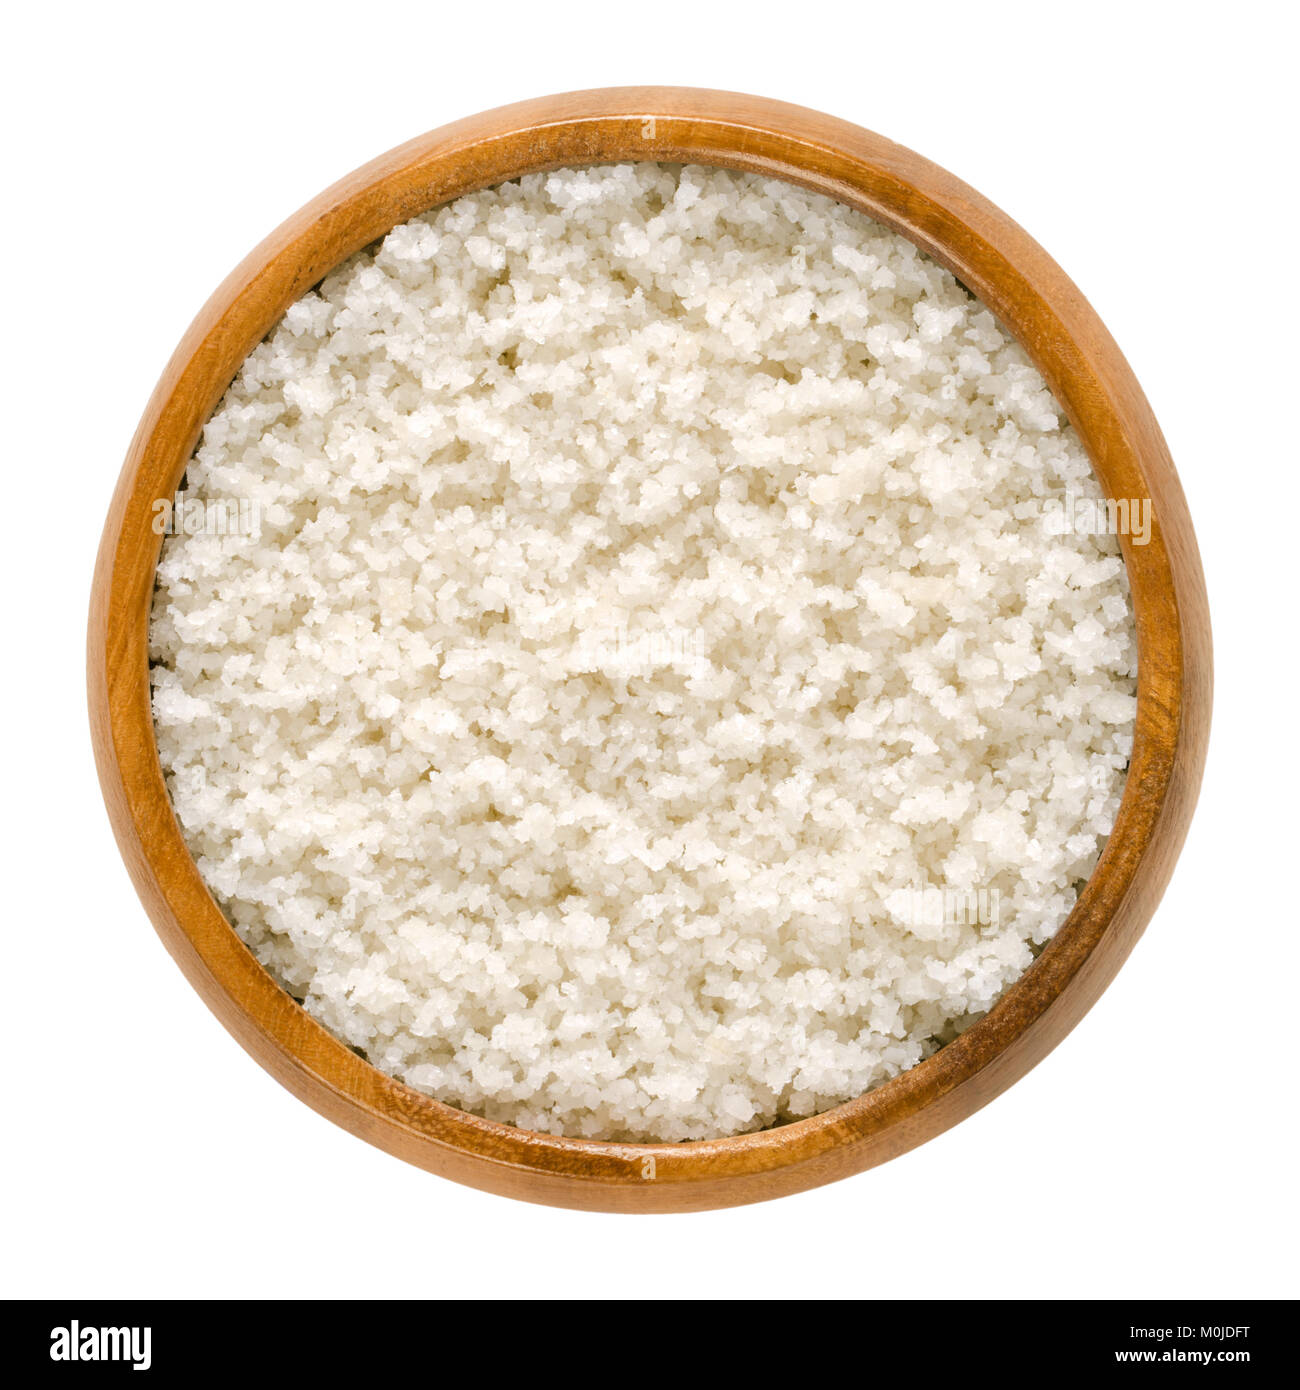 Atlantic sea salt in wooden bowl. Unrefined, unwashed, untreated, coarse salt without additives. Harvested from clay layer. Isolated macro food photo. Stock Photo